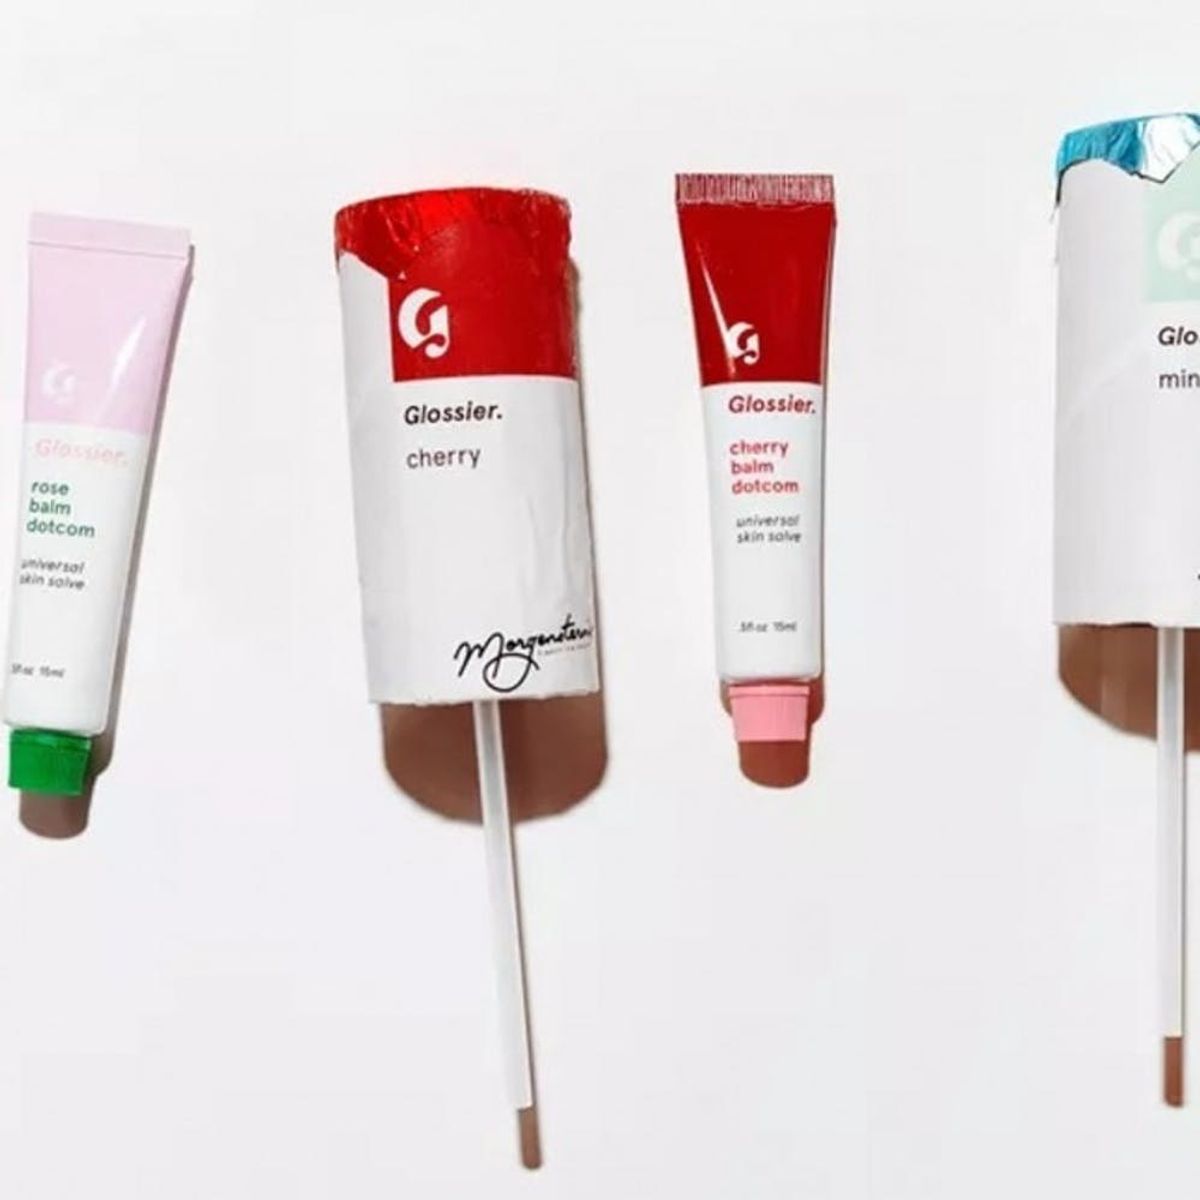 This Cult Fave Beauty Product Is Becoming an Actual Ice Cream Flavor